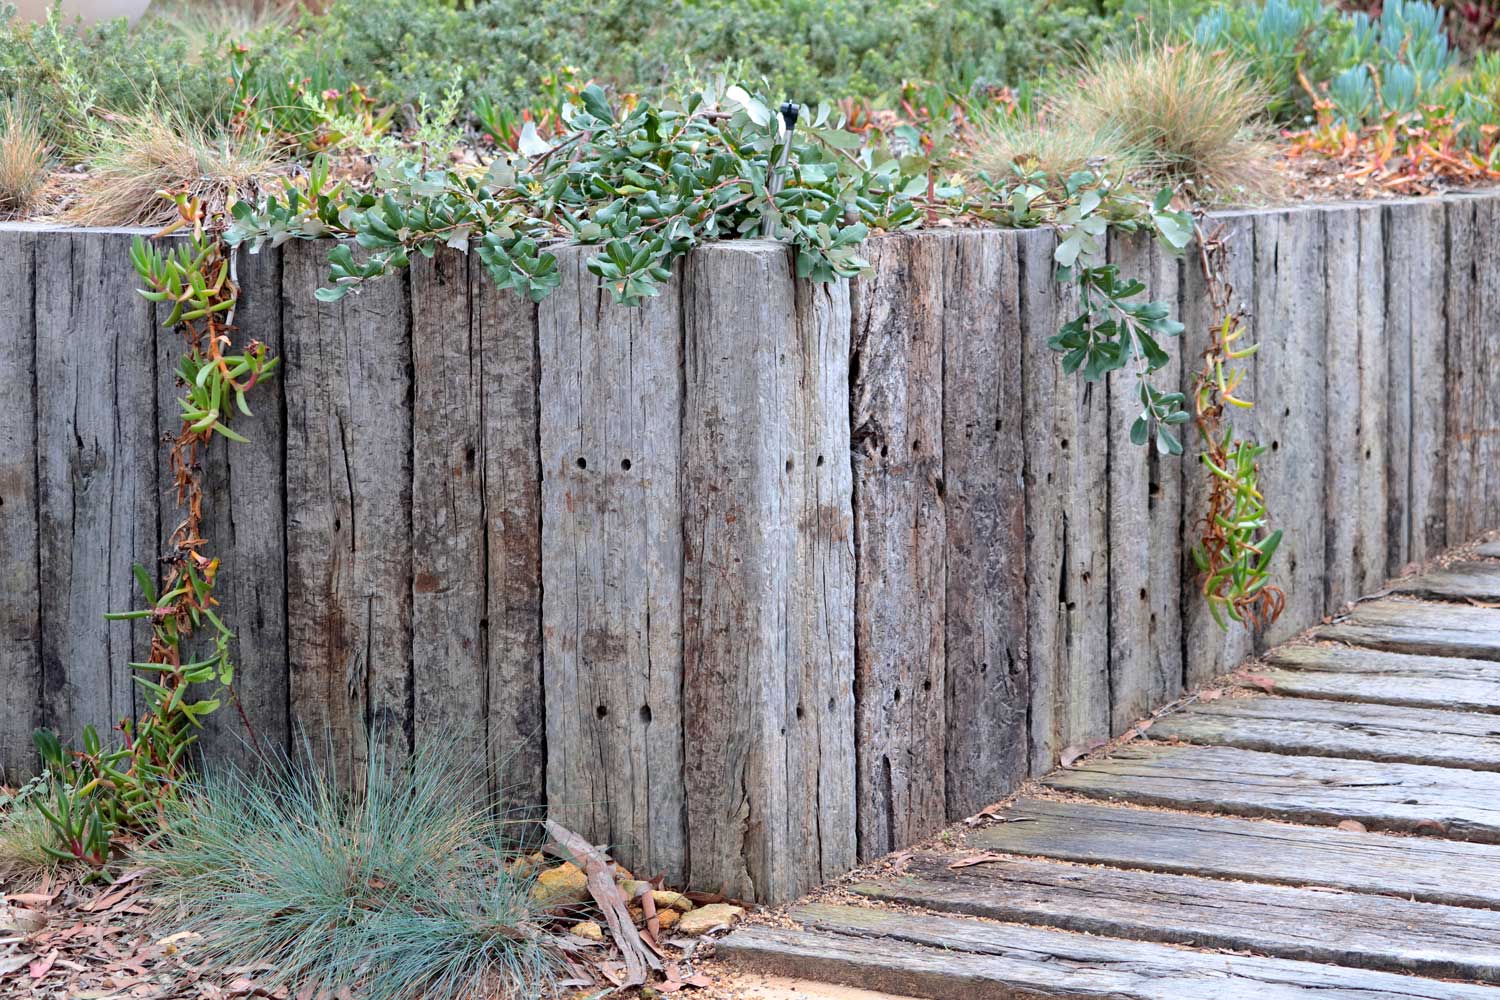 How to Build a Retaining Sleeper Wall